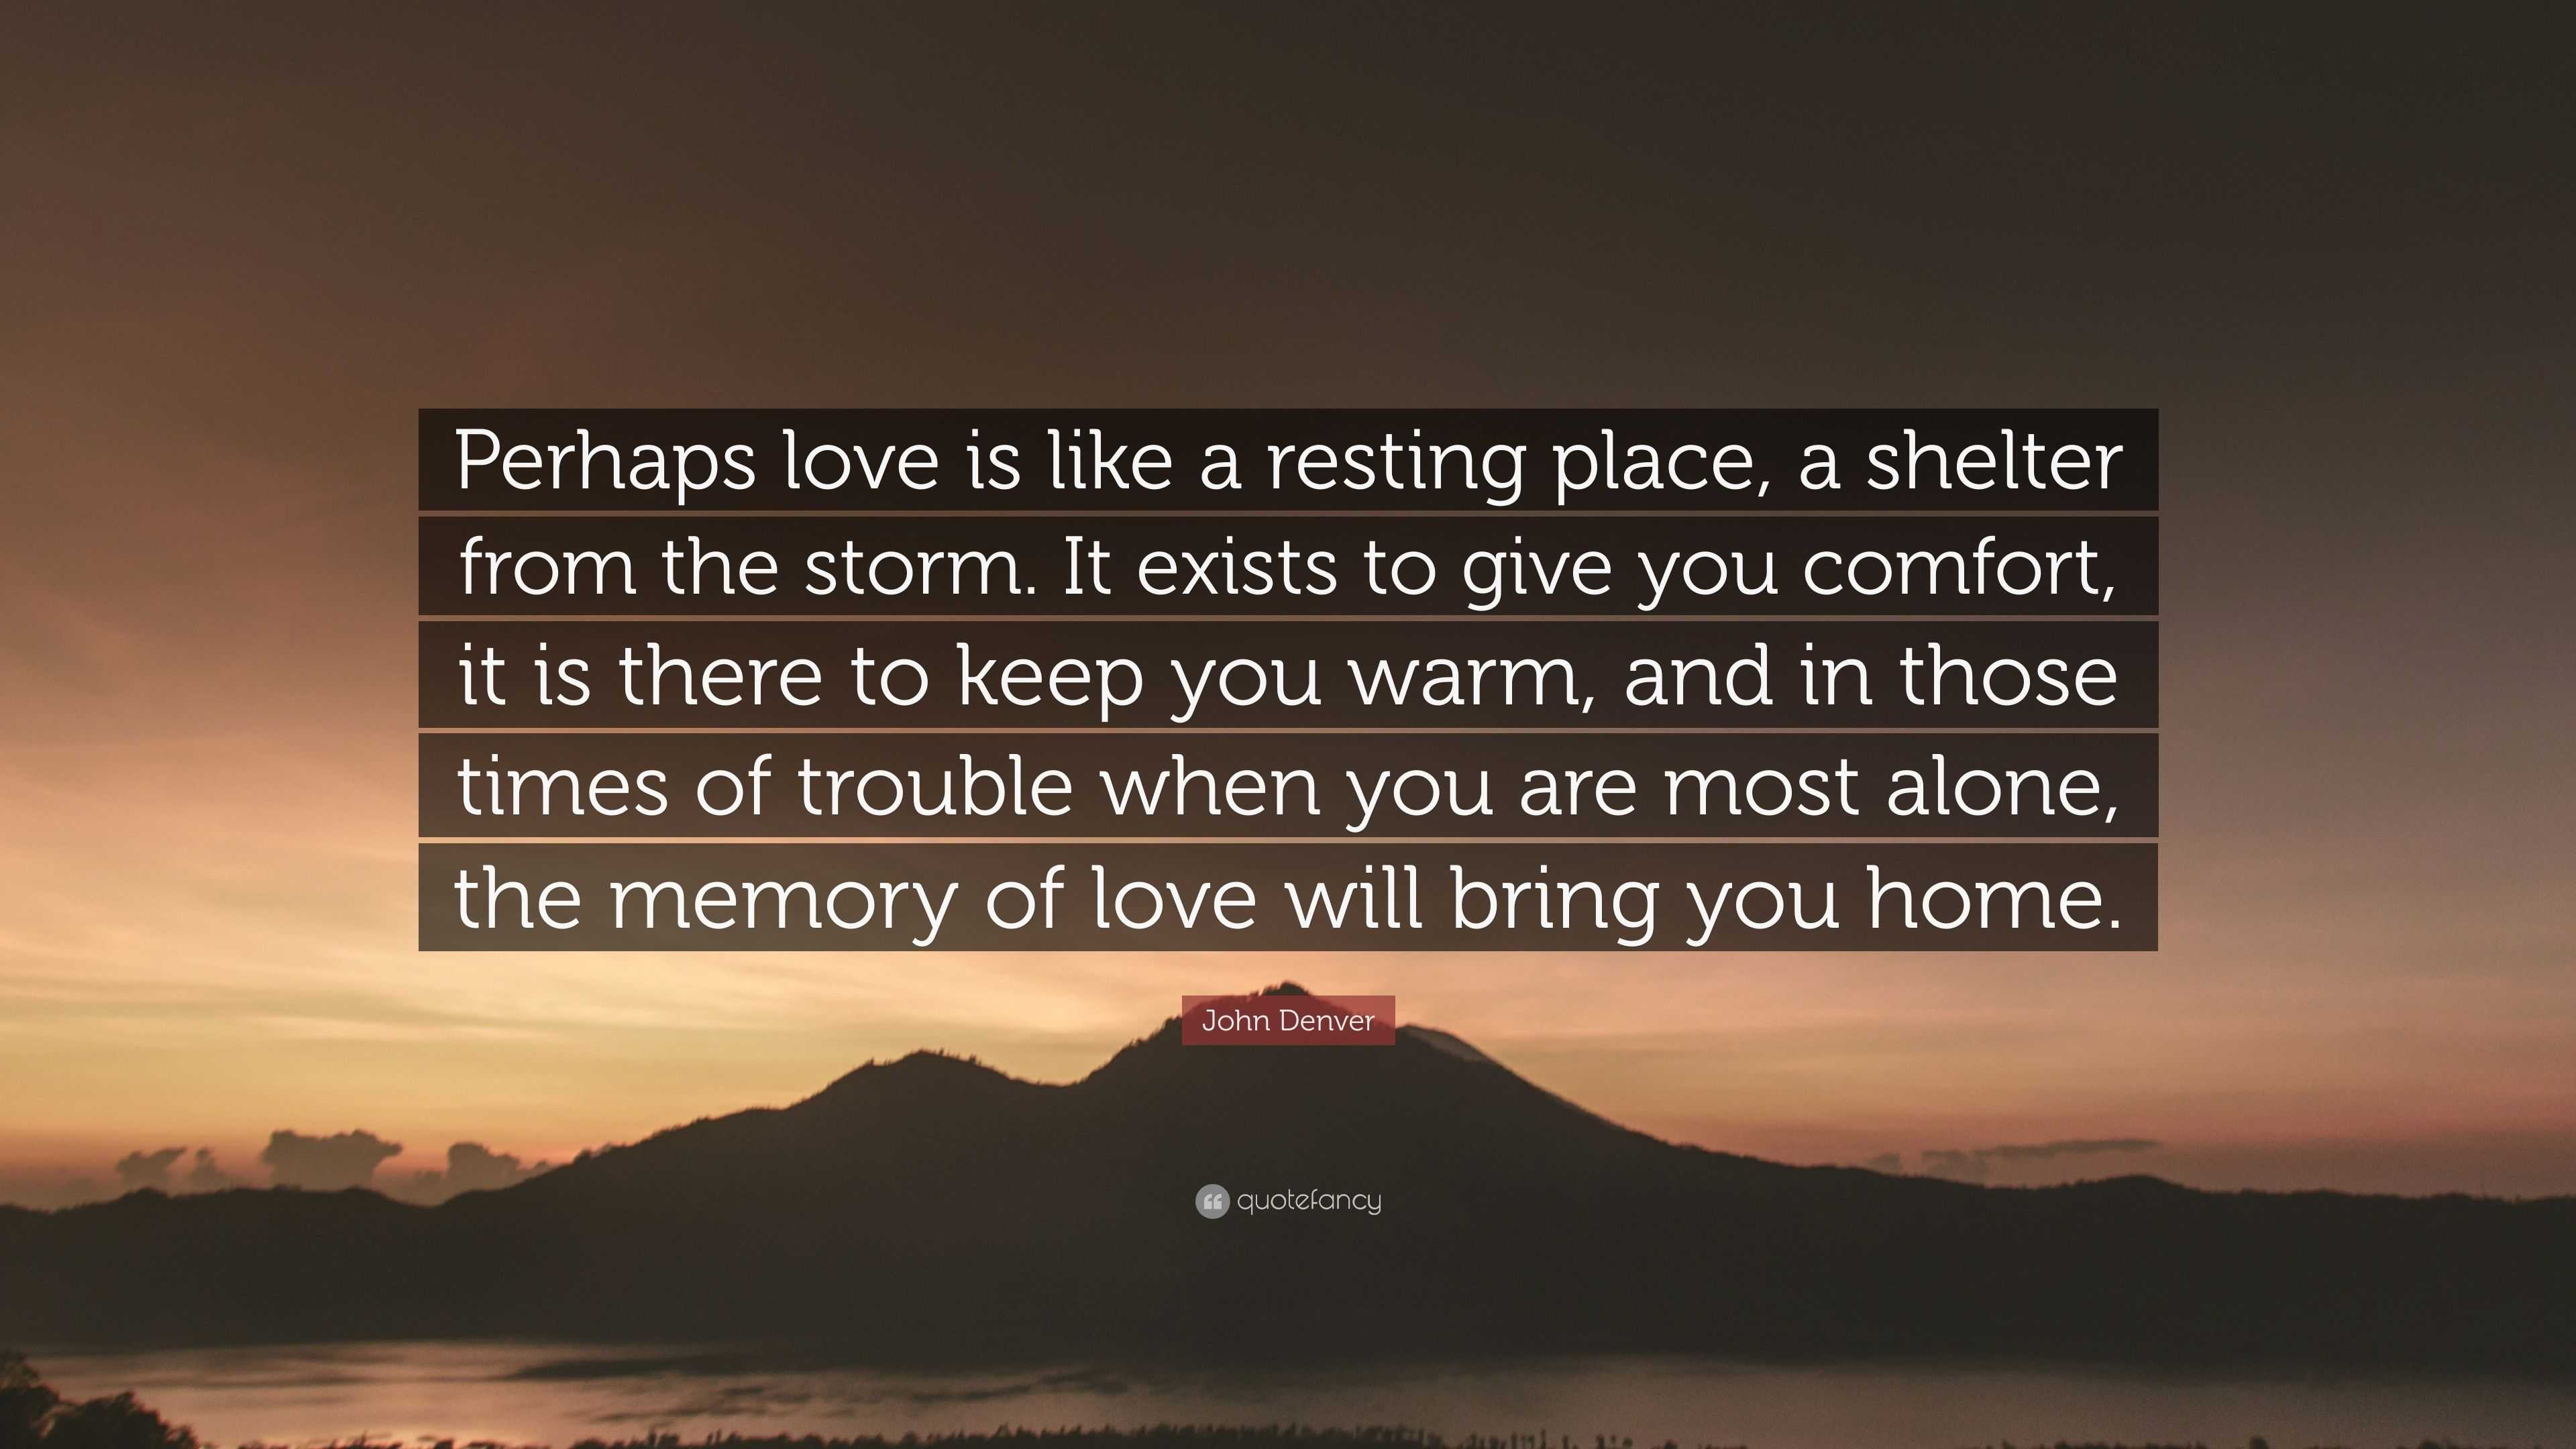 John Denver Quote “Perhaps love is like a resting place a shelter from